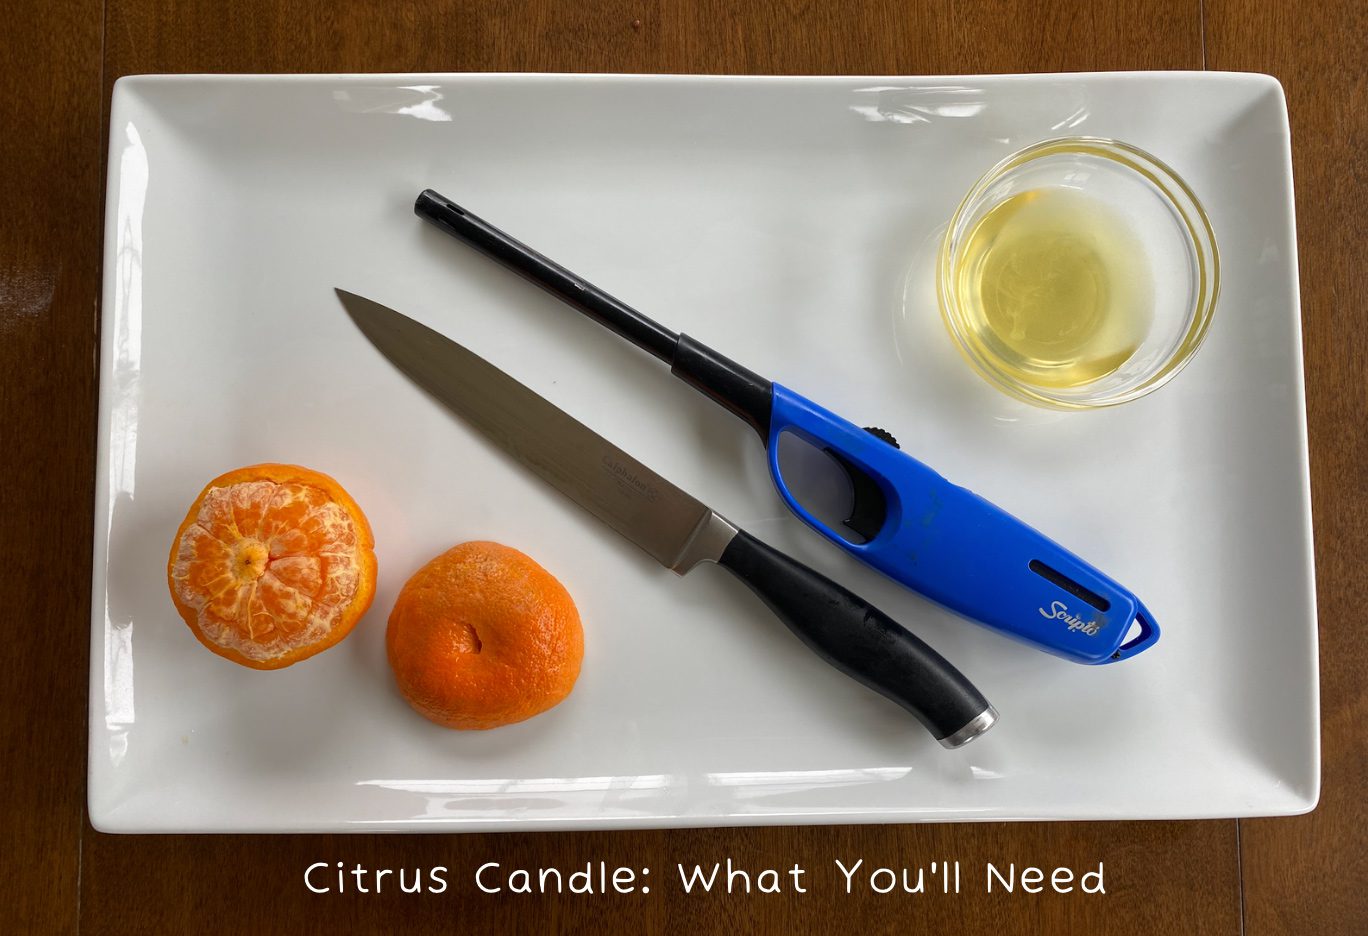 Citrus Candle - What You’ll Need